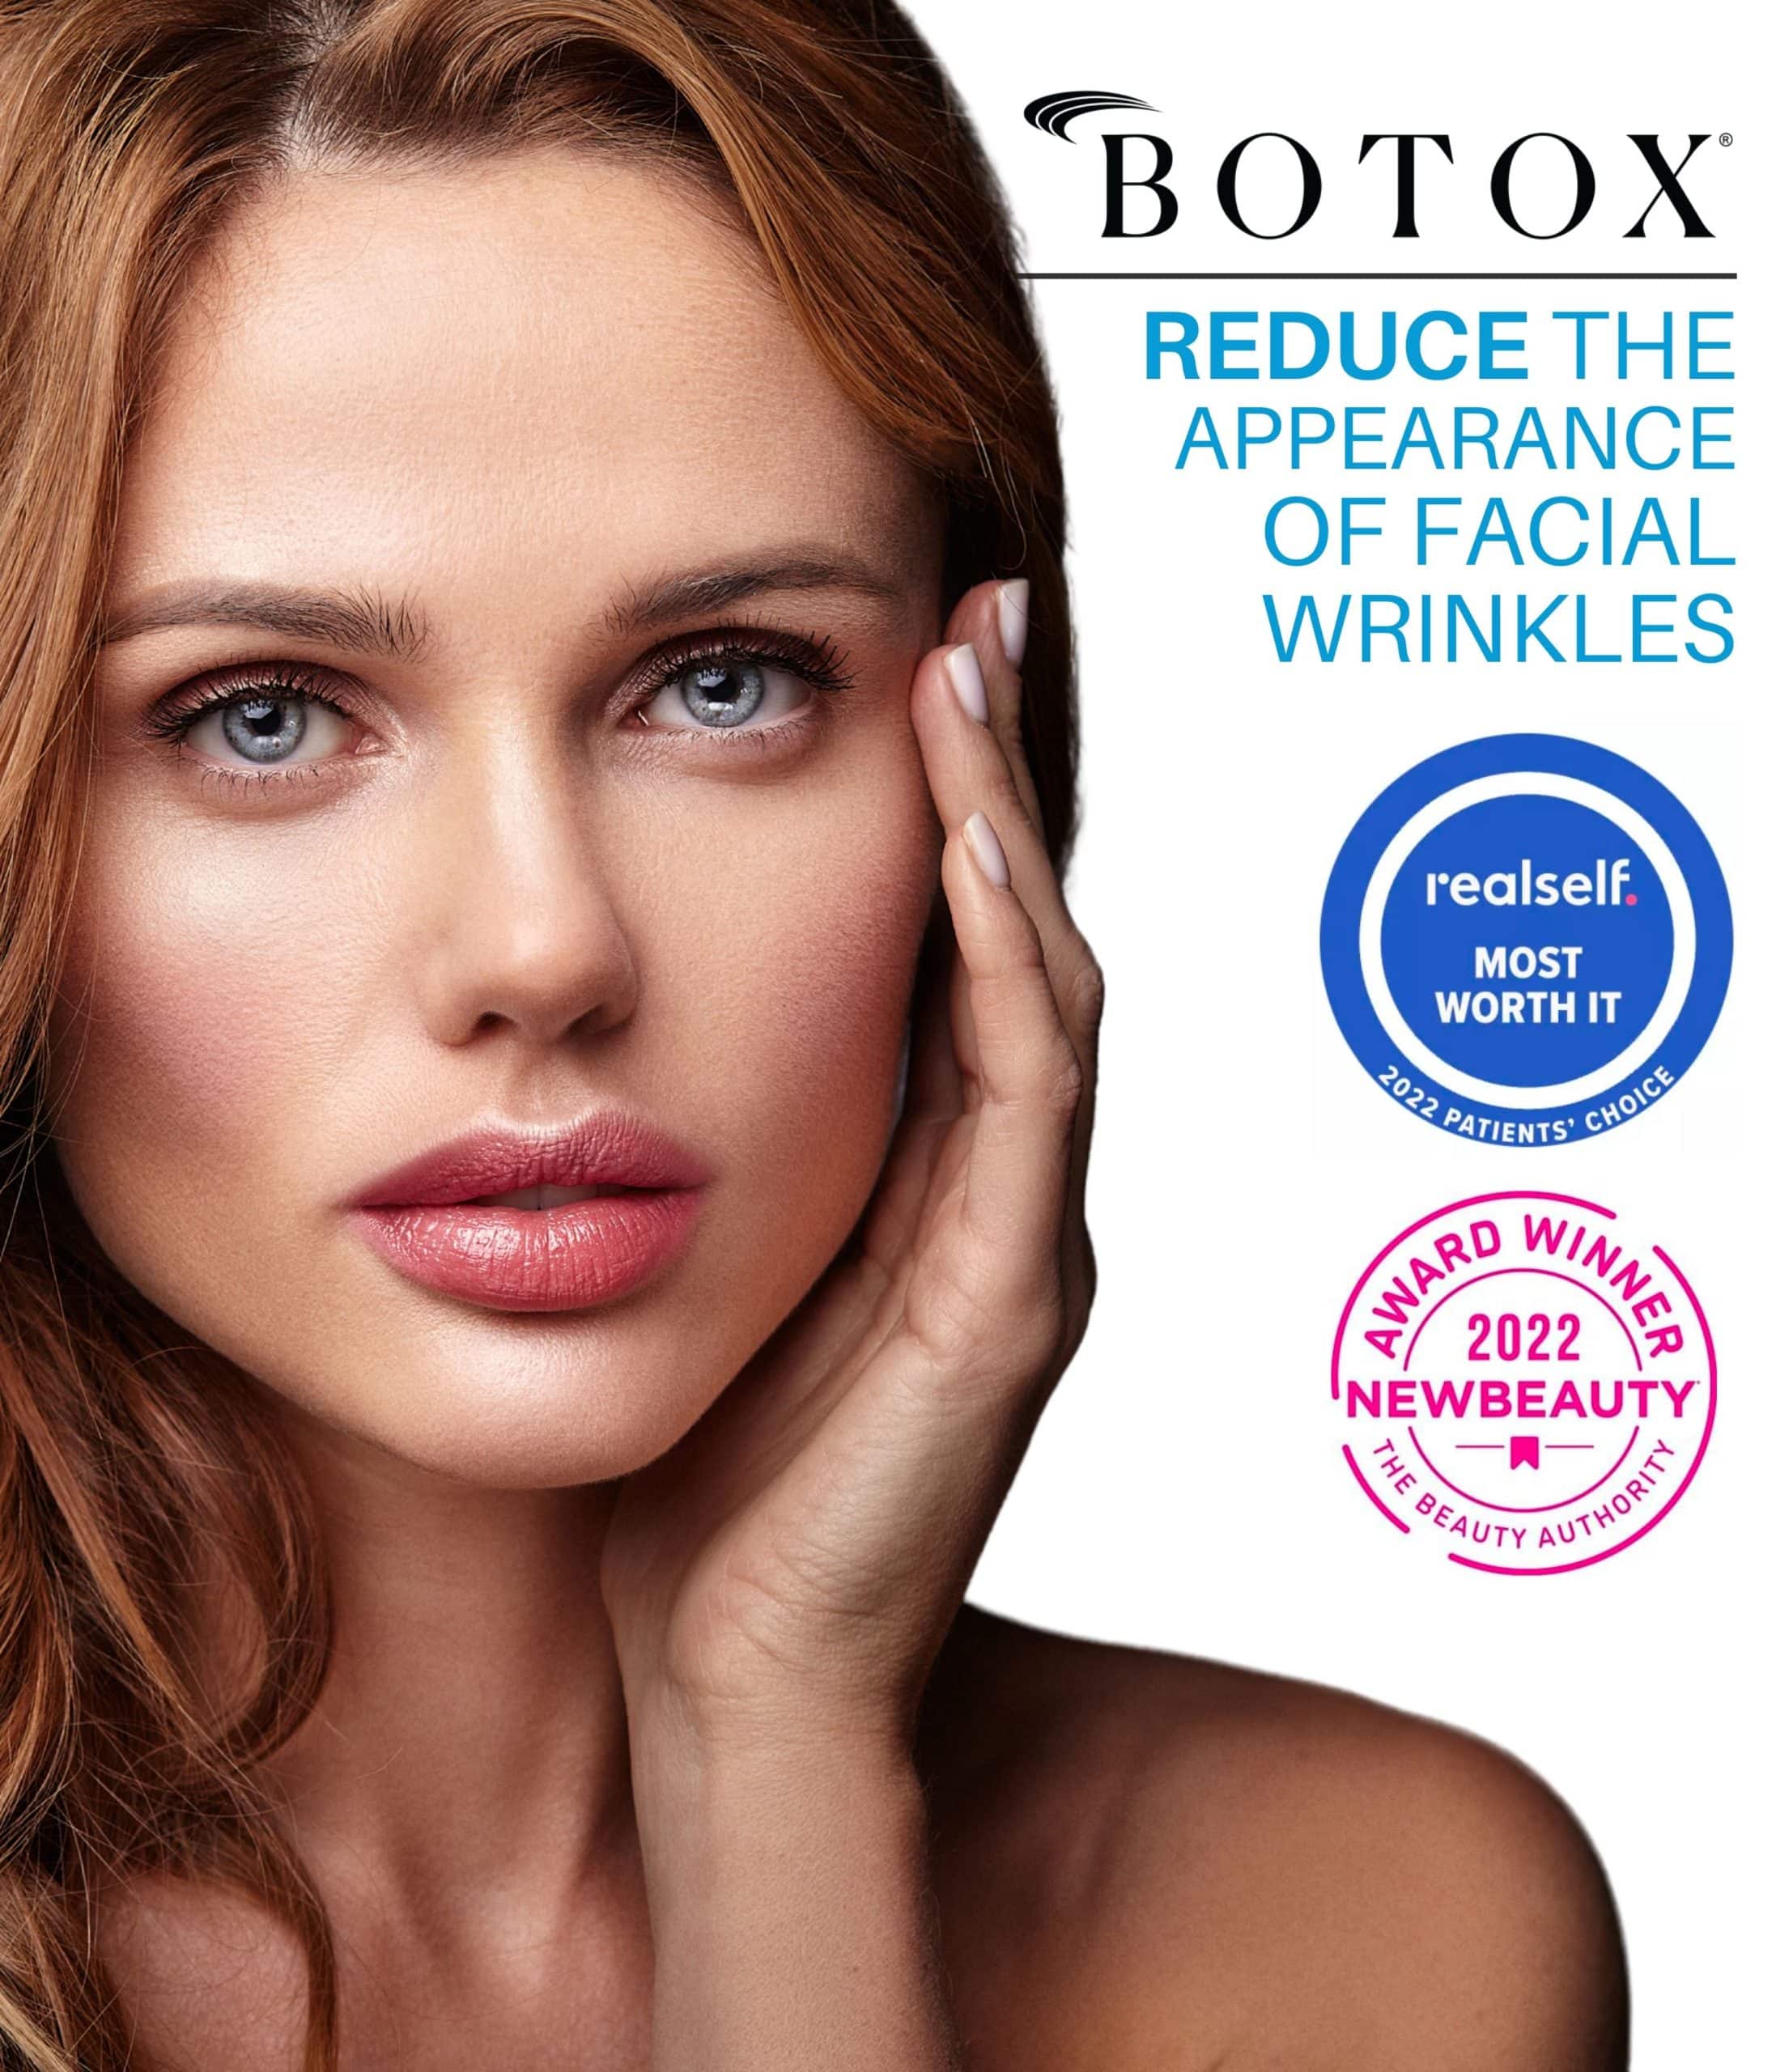 Beautiful woman with smooth skin modeling the hero image of the Botox page for Dermatology Laser Center & Medispa.